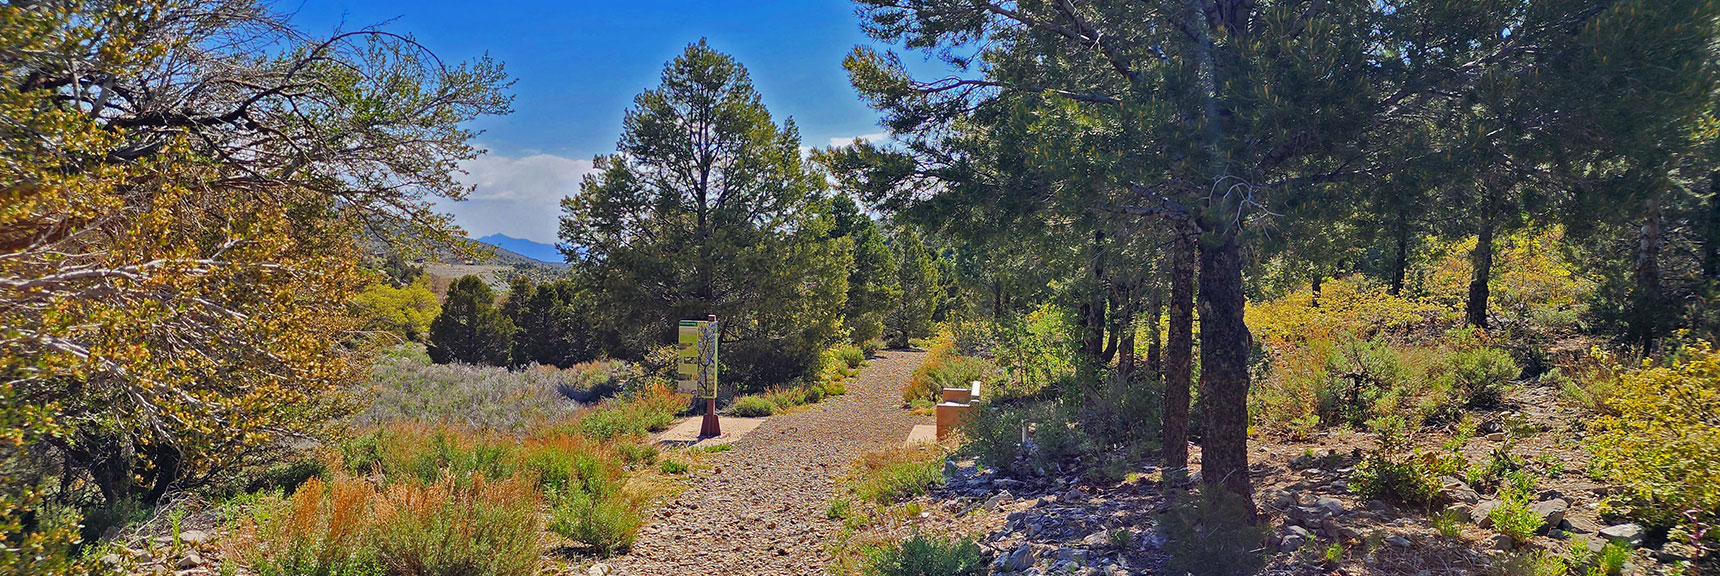 Now in The Much Dryer Zone of the Lower Acastus Trail Approaching the Visitor Gateway | Acastus Trail | Mt Charleston Wilderness | Spring Mountains, Nevada